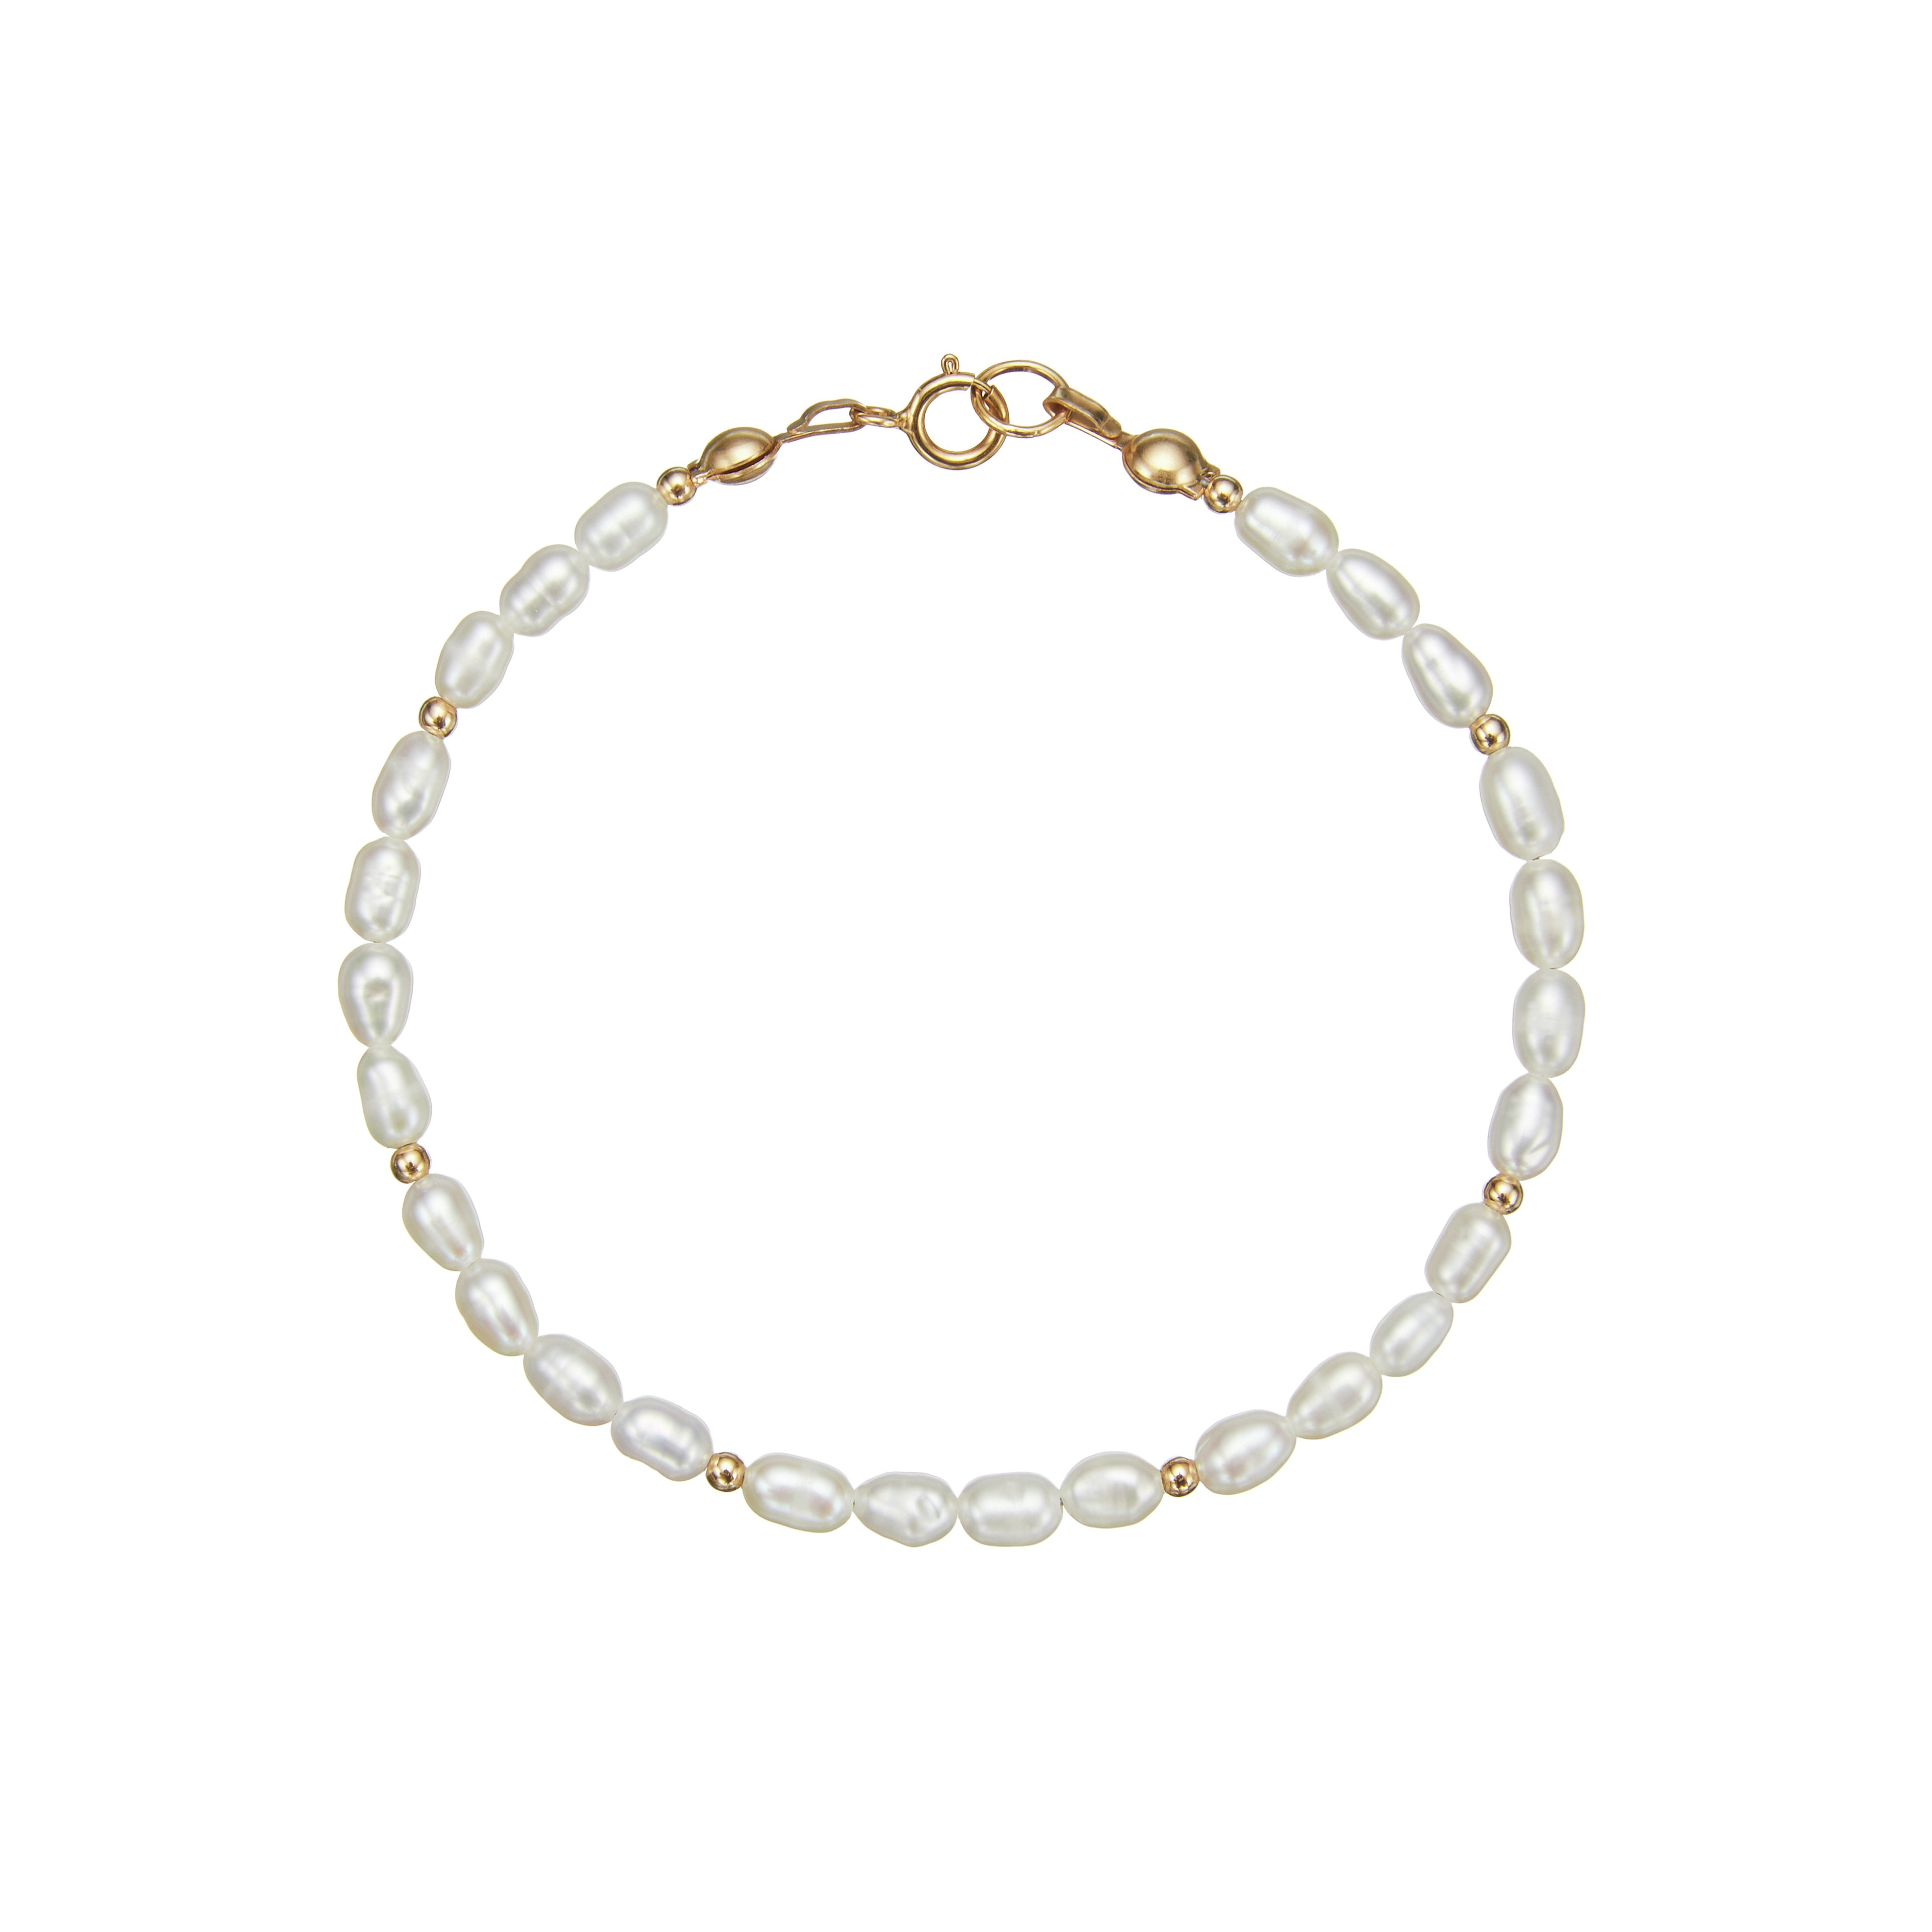 Gold beaded seed pearl bracelet on white background